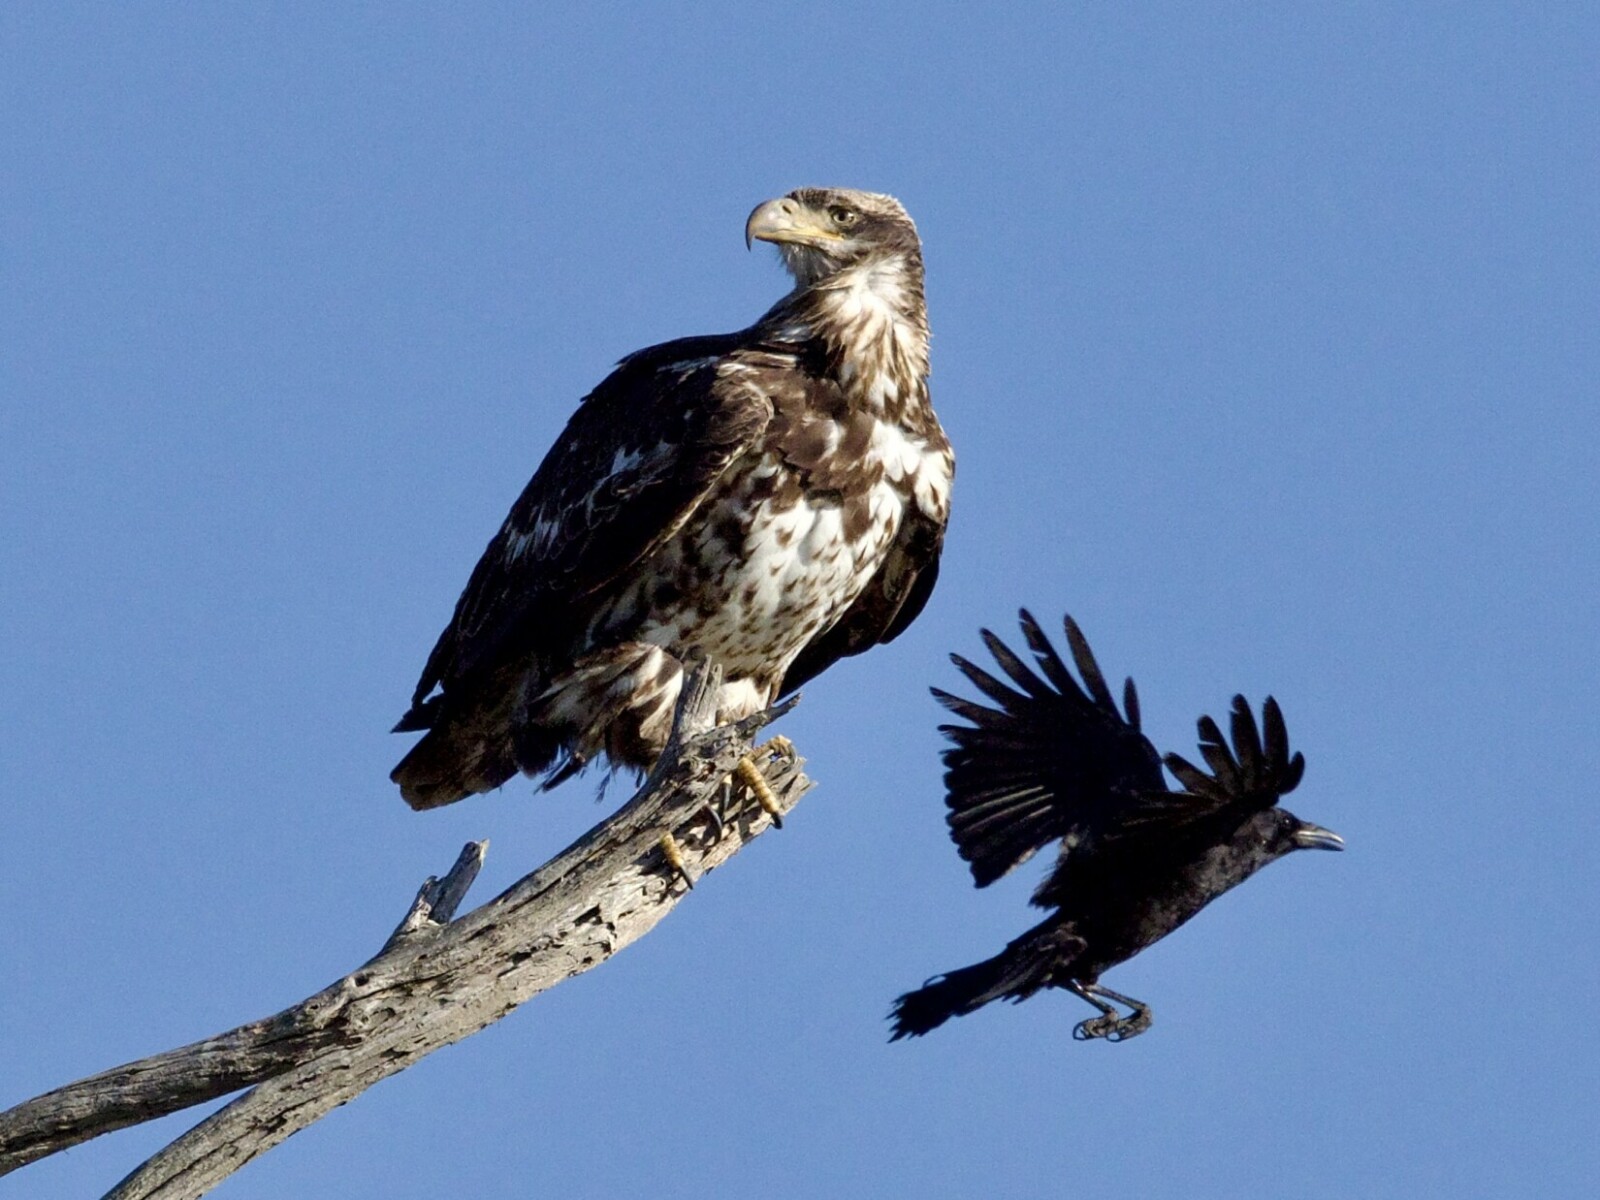 Immature Bald Eagle Mobbed by Crow